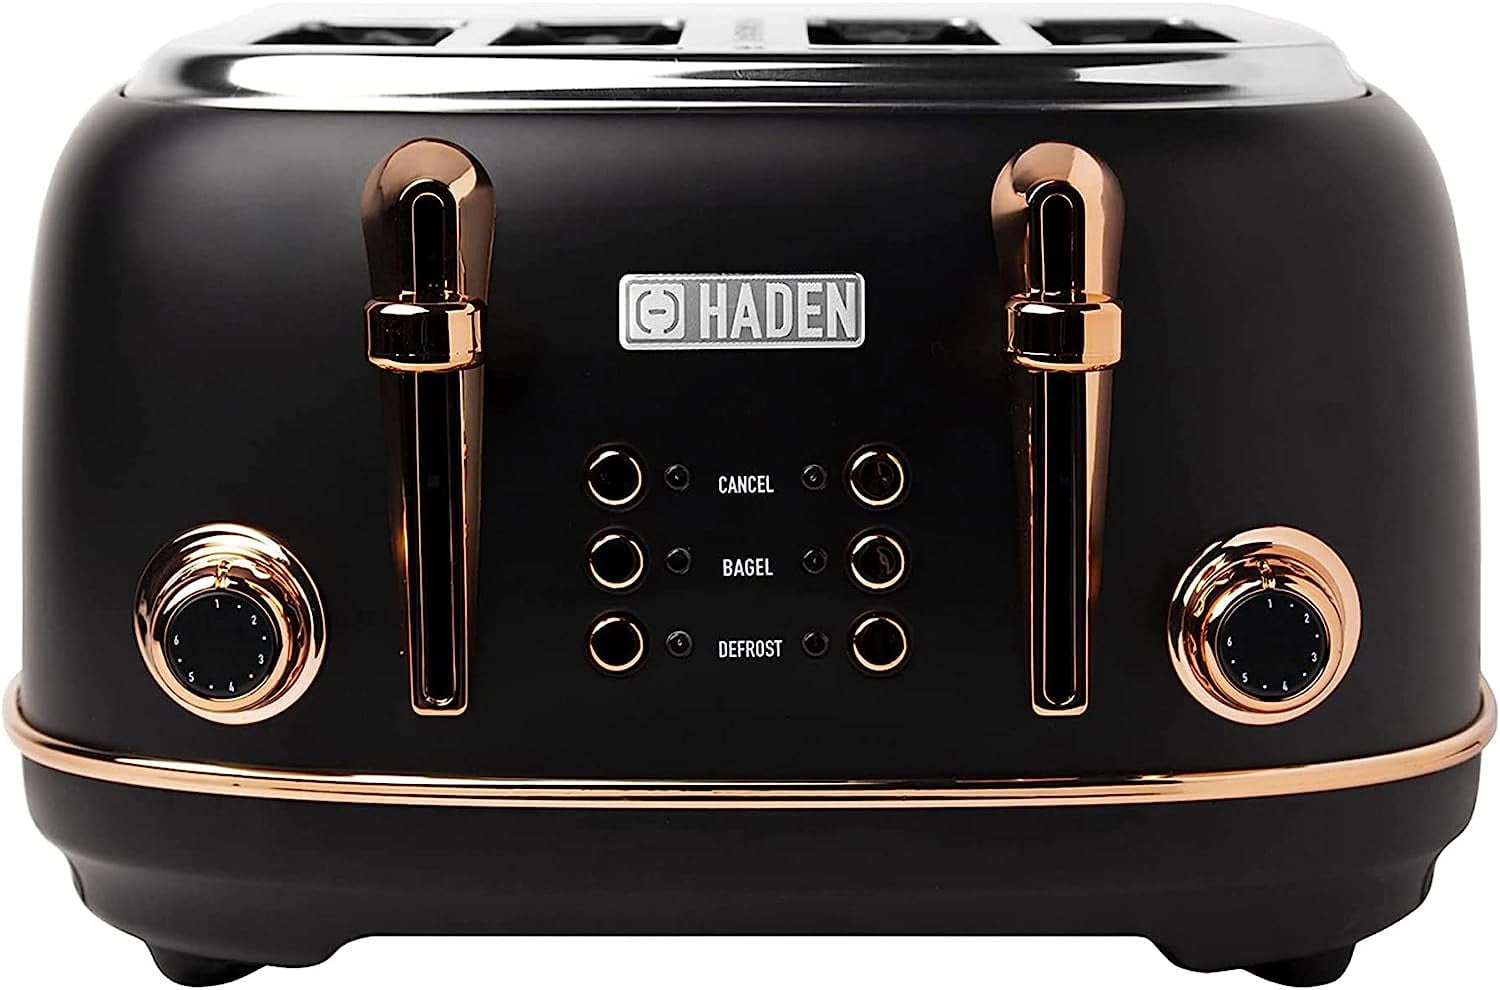 Haden Heritage Stainless Steel Electric Tea Kettle with Toaster, Black/ Copper, 1 Piece - City Market